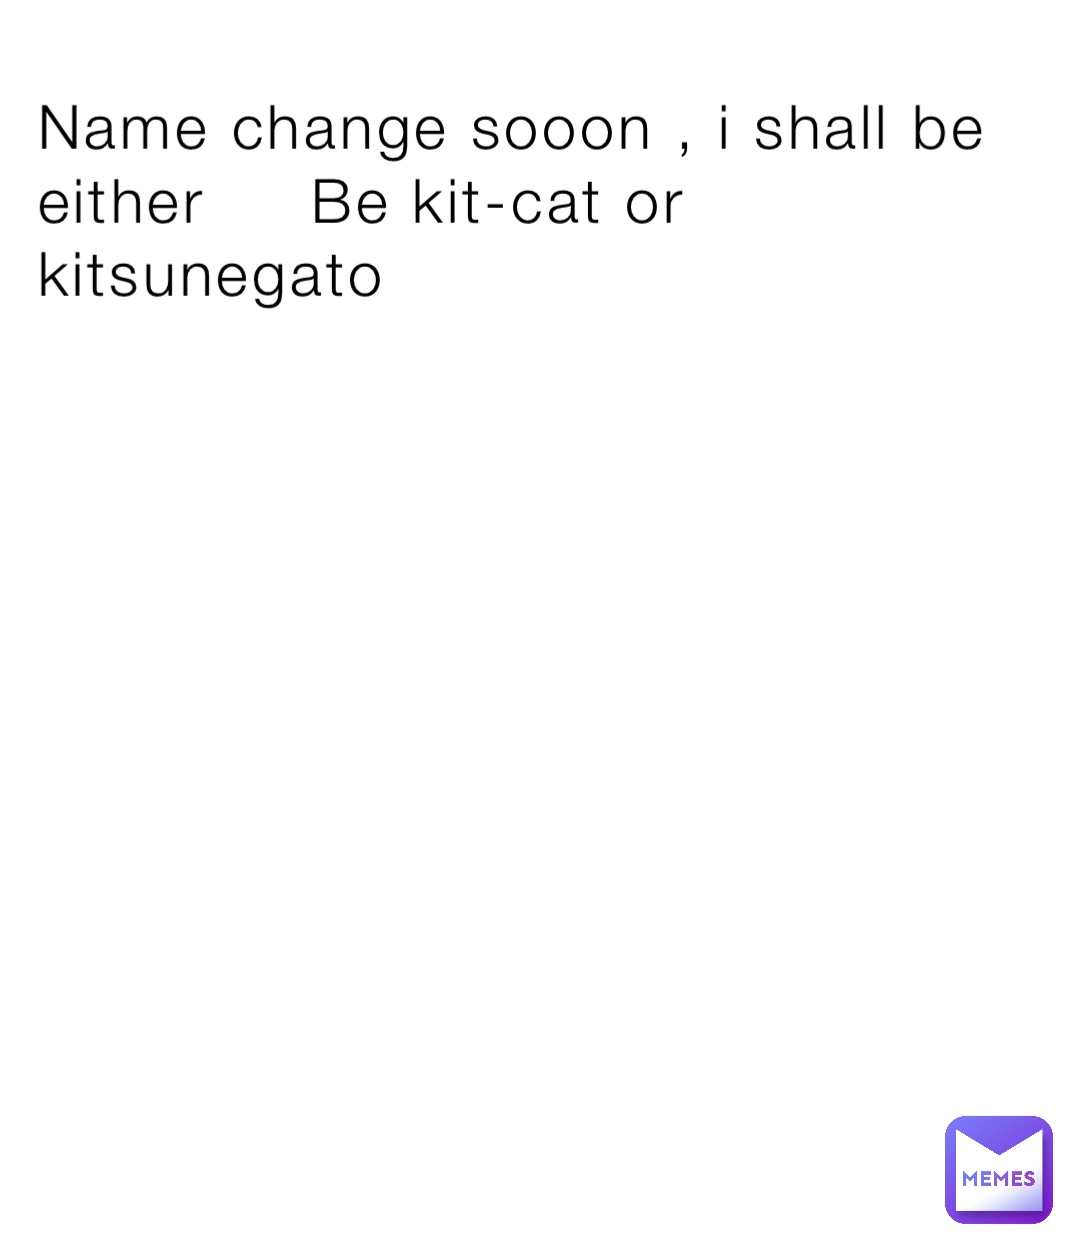 Name change sooon , i shall be either     Be kit-cat or kitsunegato